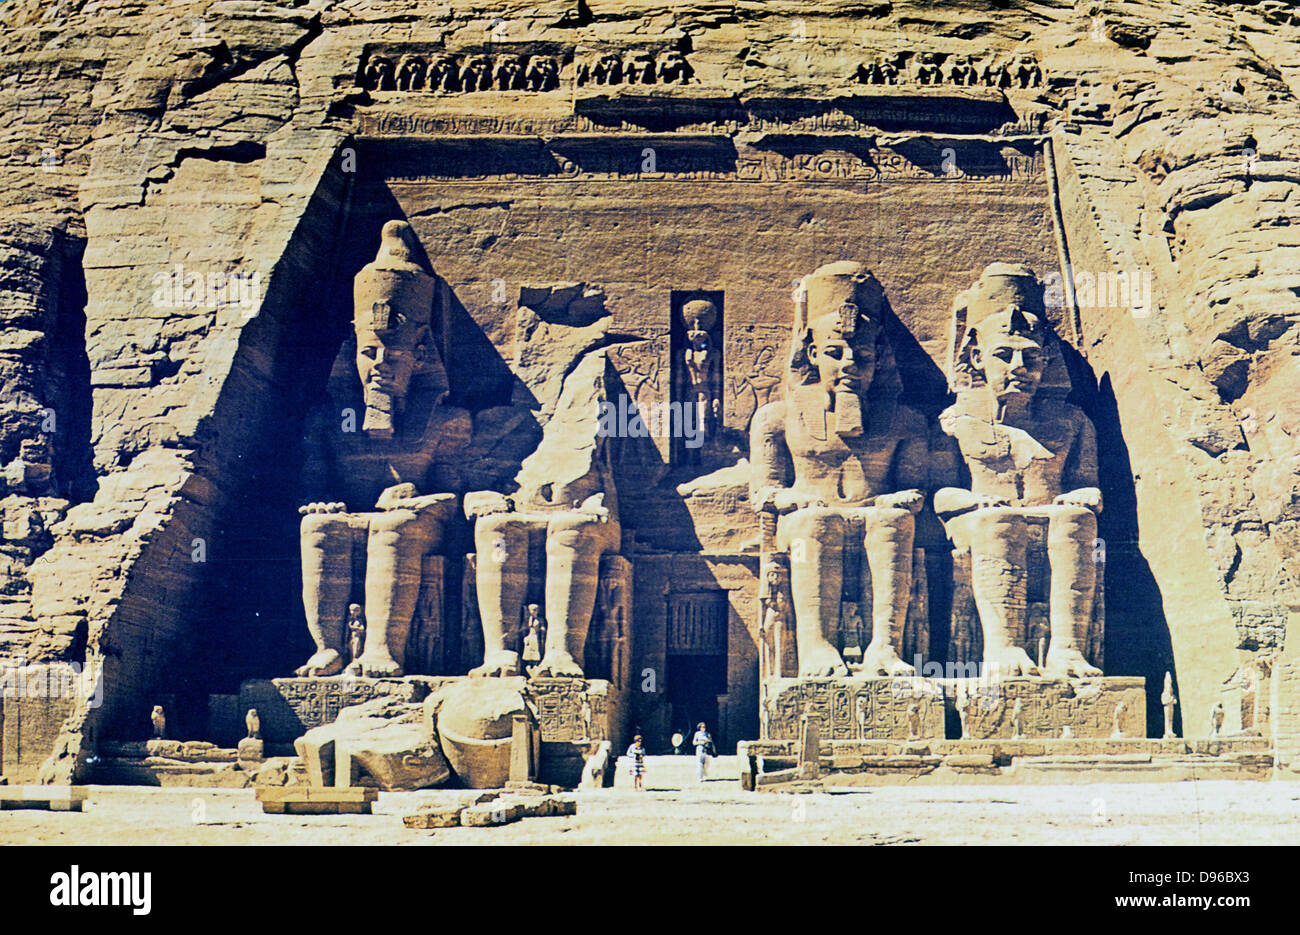 Sandstone statues of Rameses (Ramses) II (ruled c1304-c1273 BC) outside entrance to main temple at Abu Simbel (Abu Sunbul). Temple dedicated to sun gods Amon-Re and Re-Horakhte.  Not known outside Egypt in modern times until 1813 and explored in 1817 by Belzoni. Stock Photo